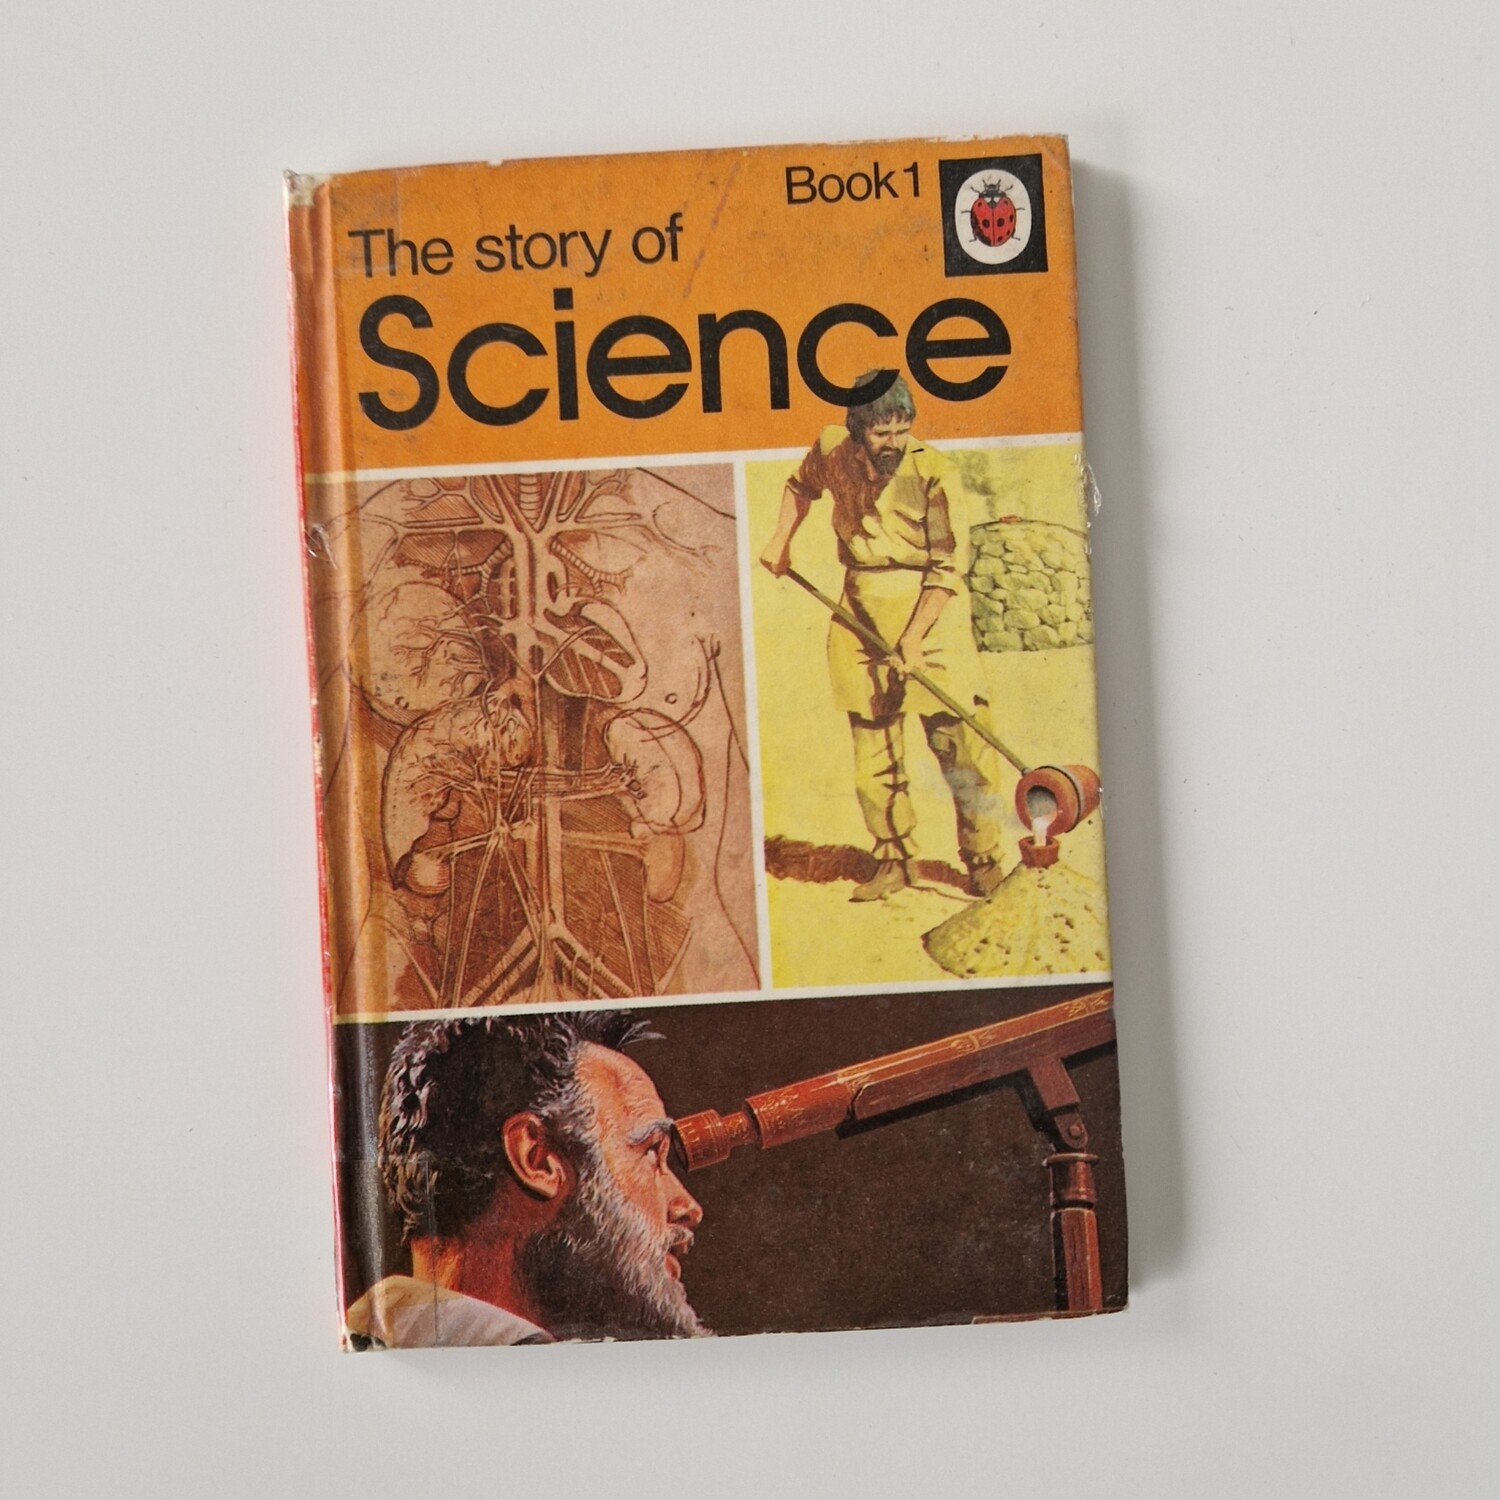 The Story of Science - Book 1 - 1973 Ladybird Book